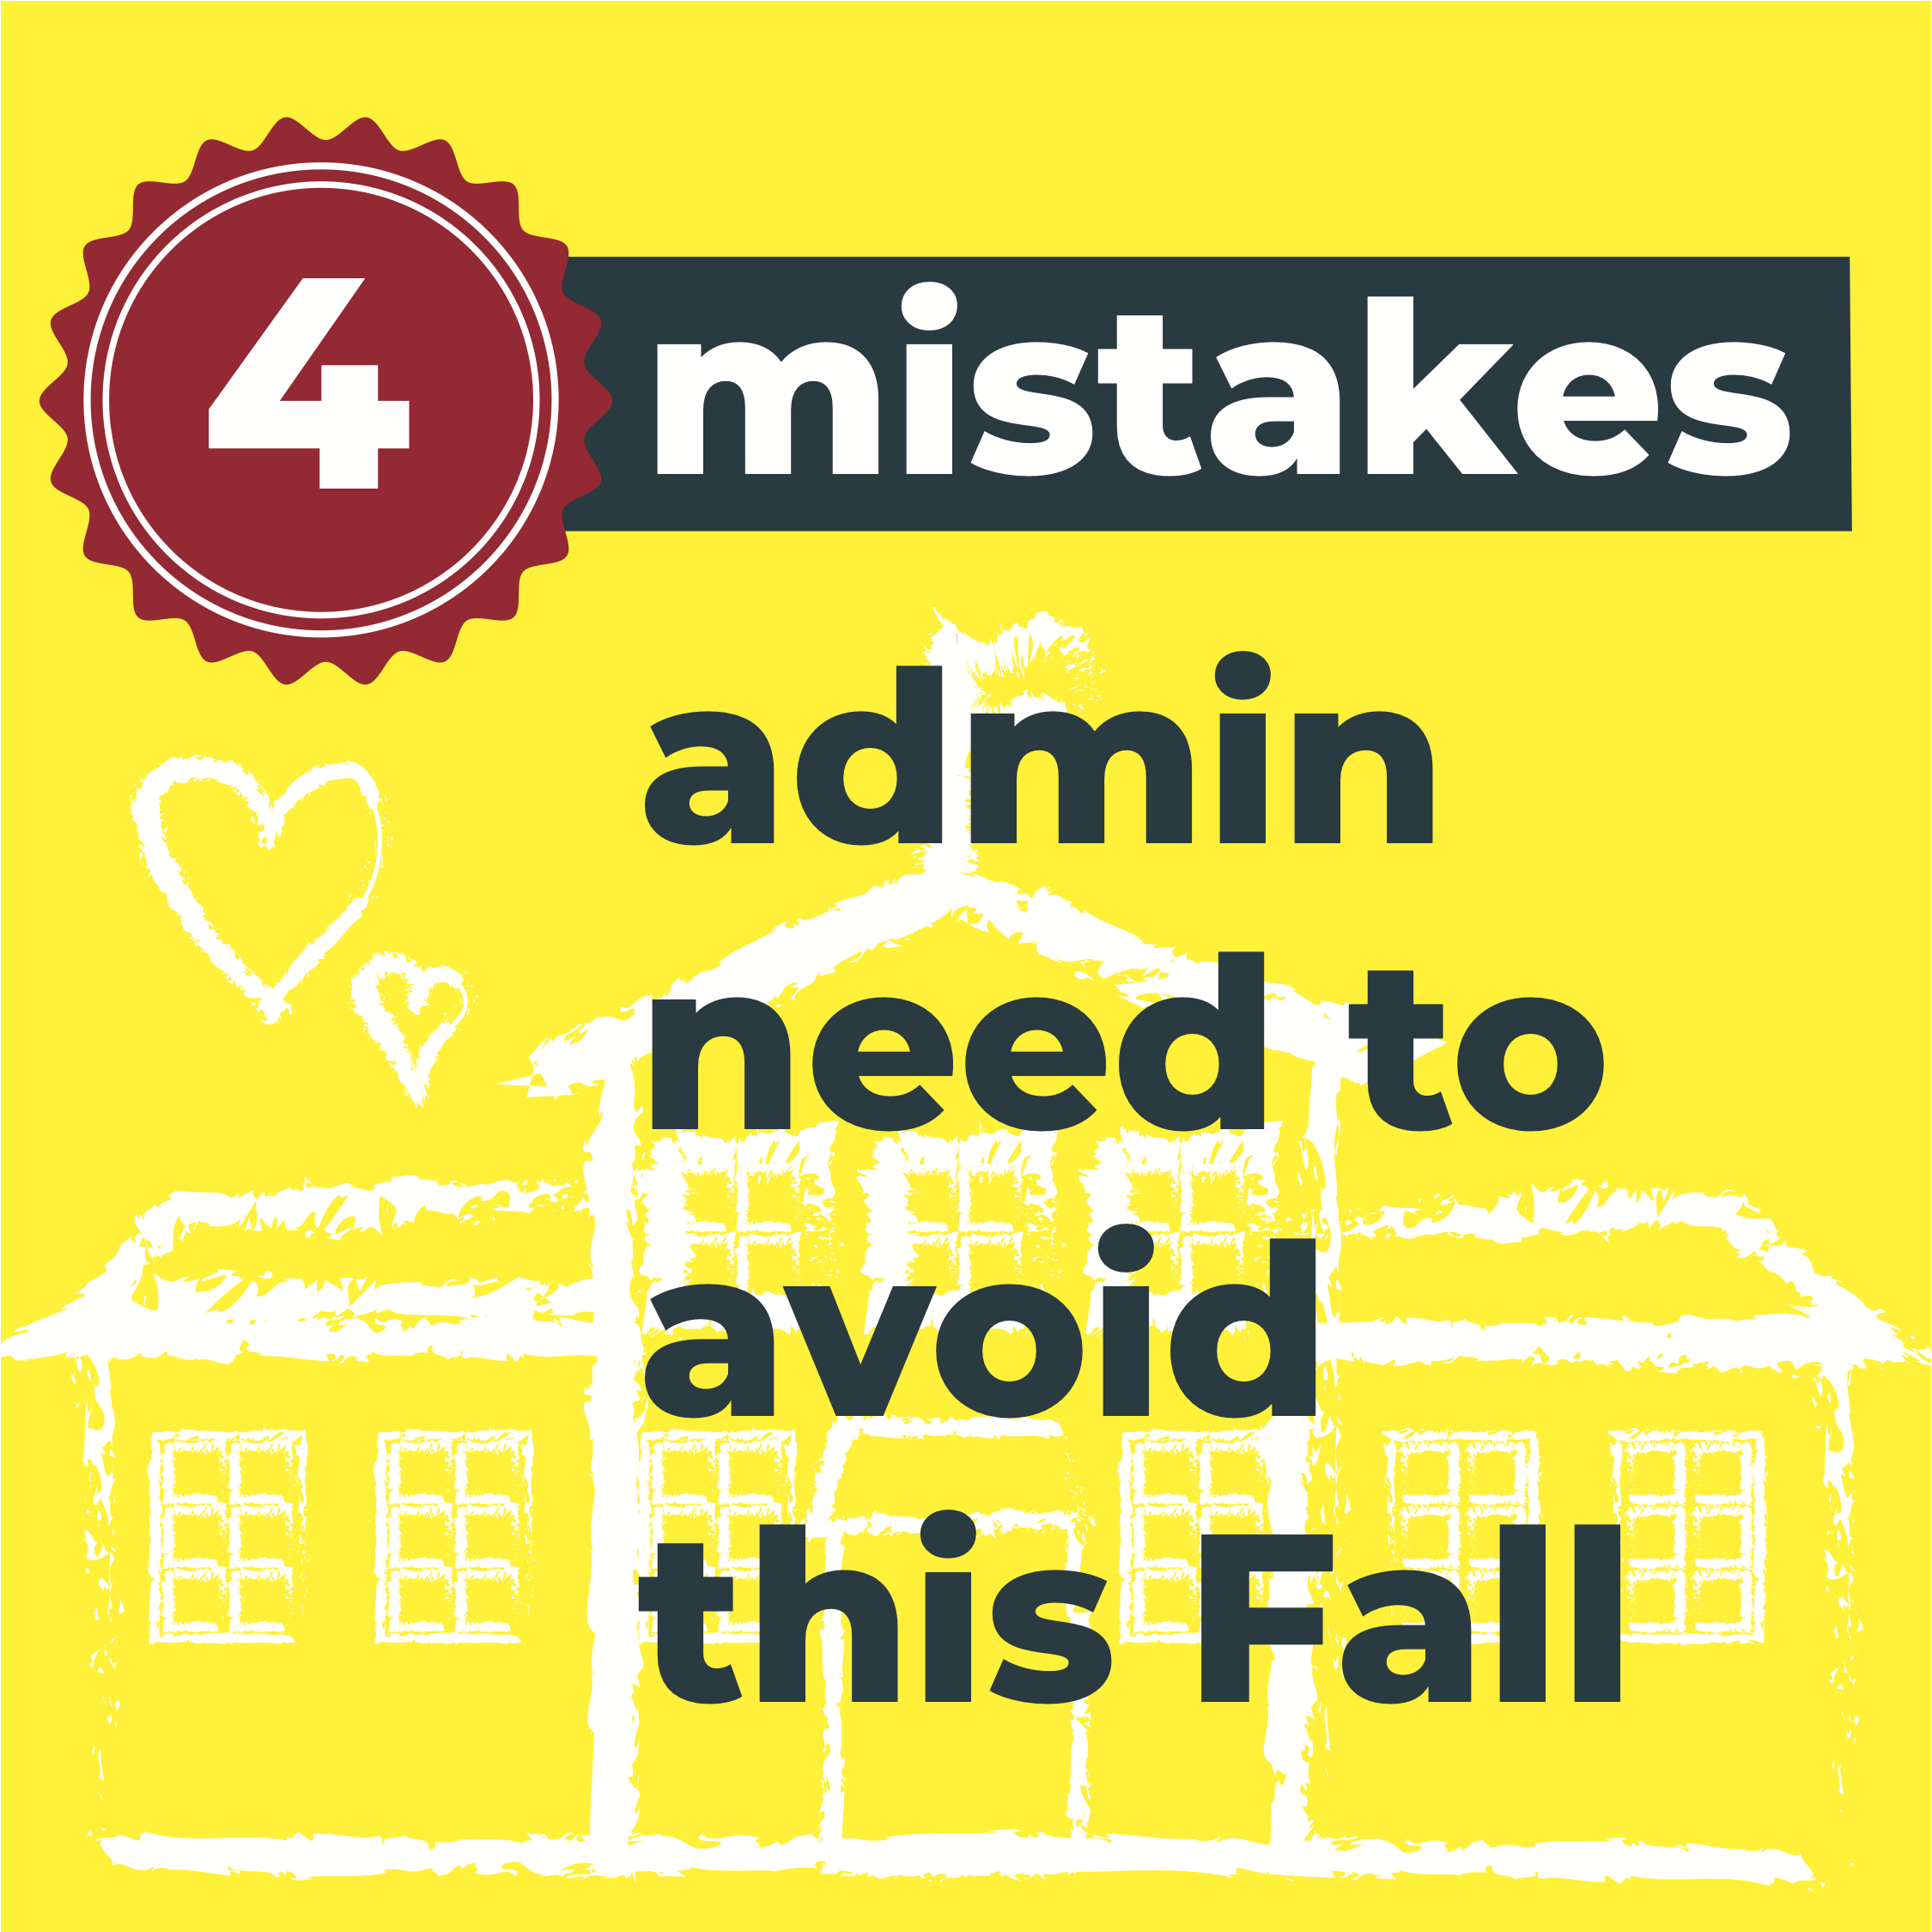 4 mistakes admin need to avoid this fall